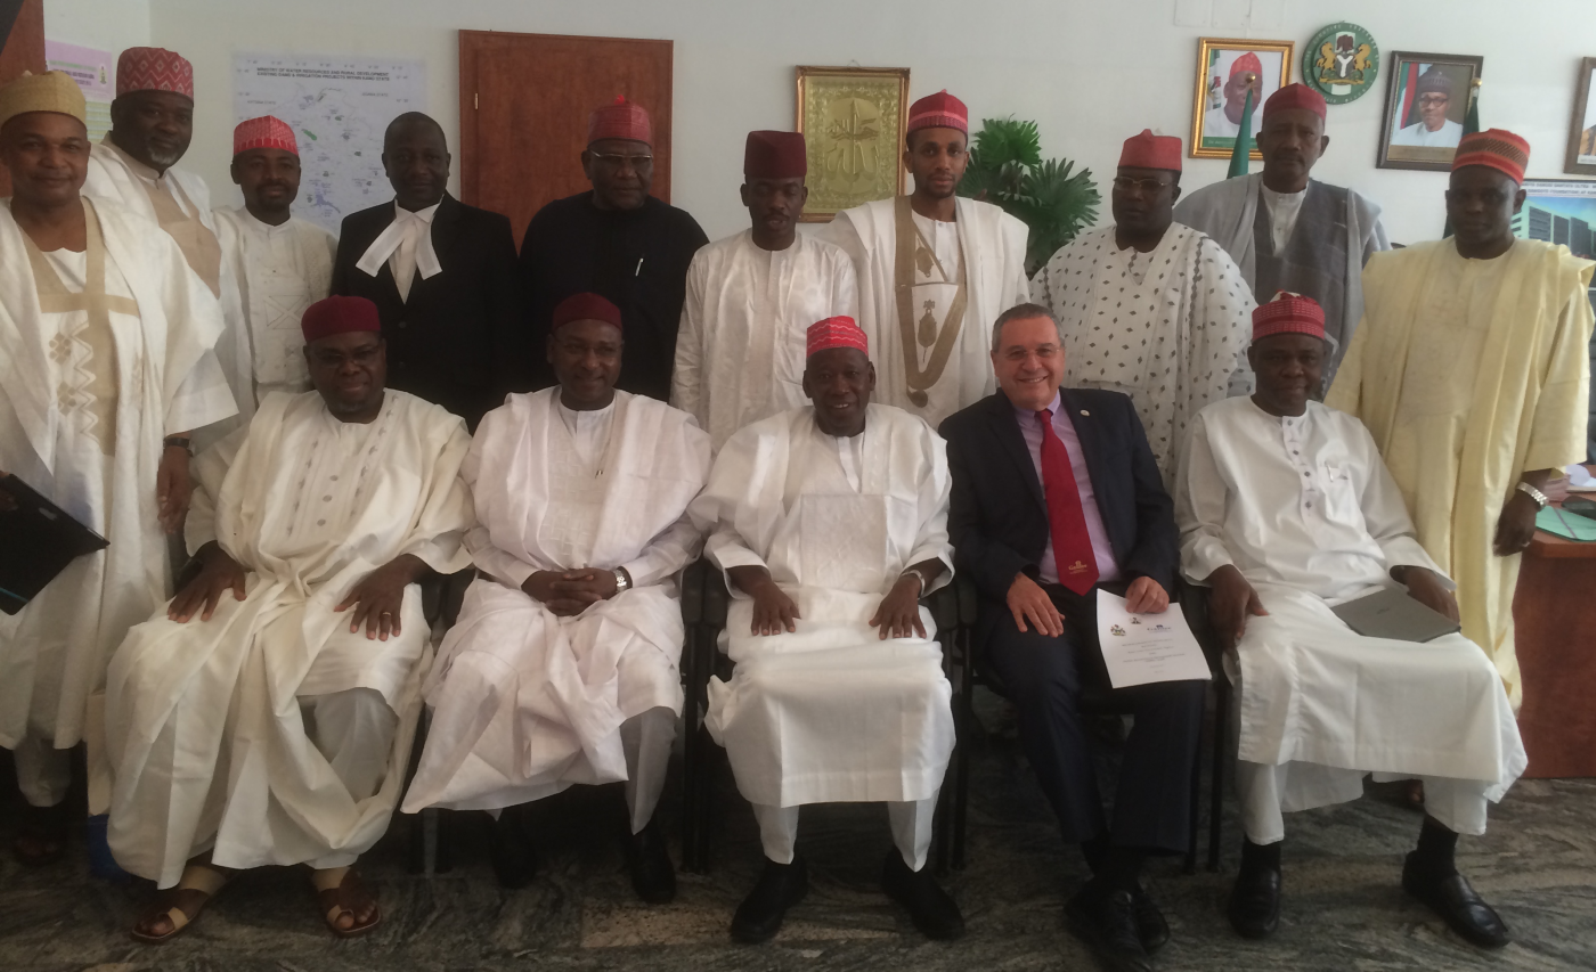 Galilee International Management Institute President Joseph Shevel with ministers of the Kano government following the signing of an agreement to train farmers in the Nigerian state. Photo courtesy of GIMI